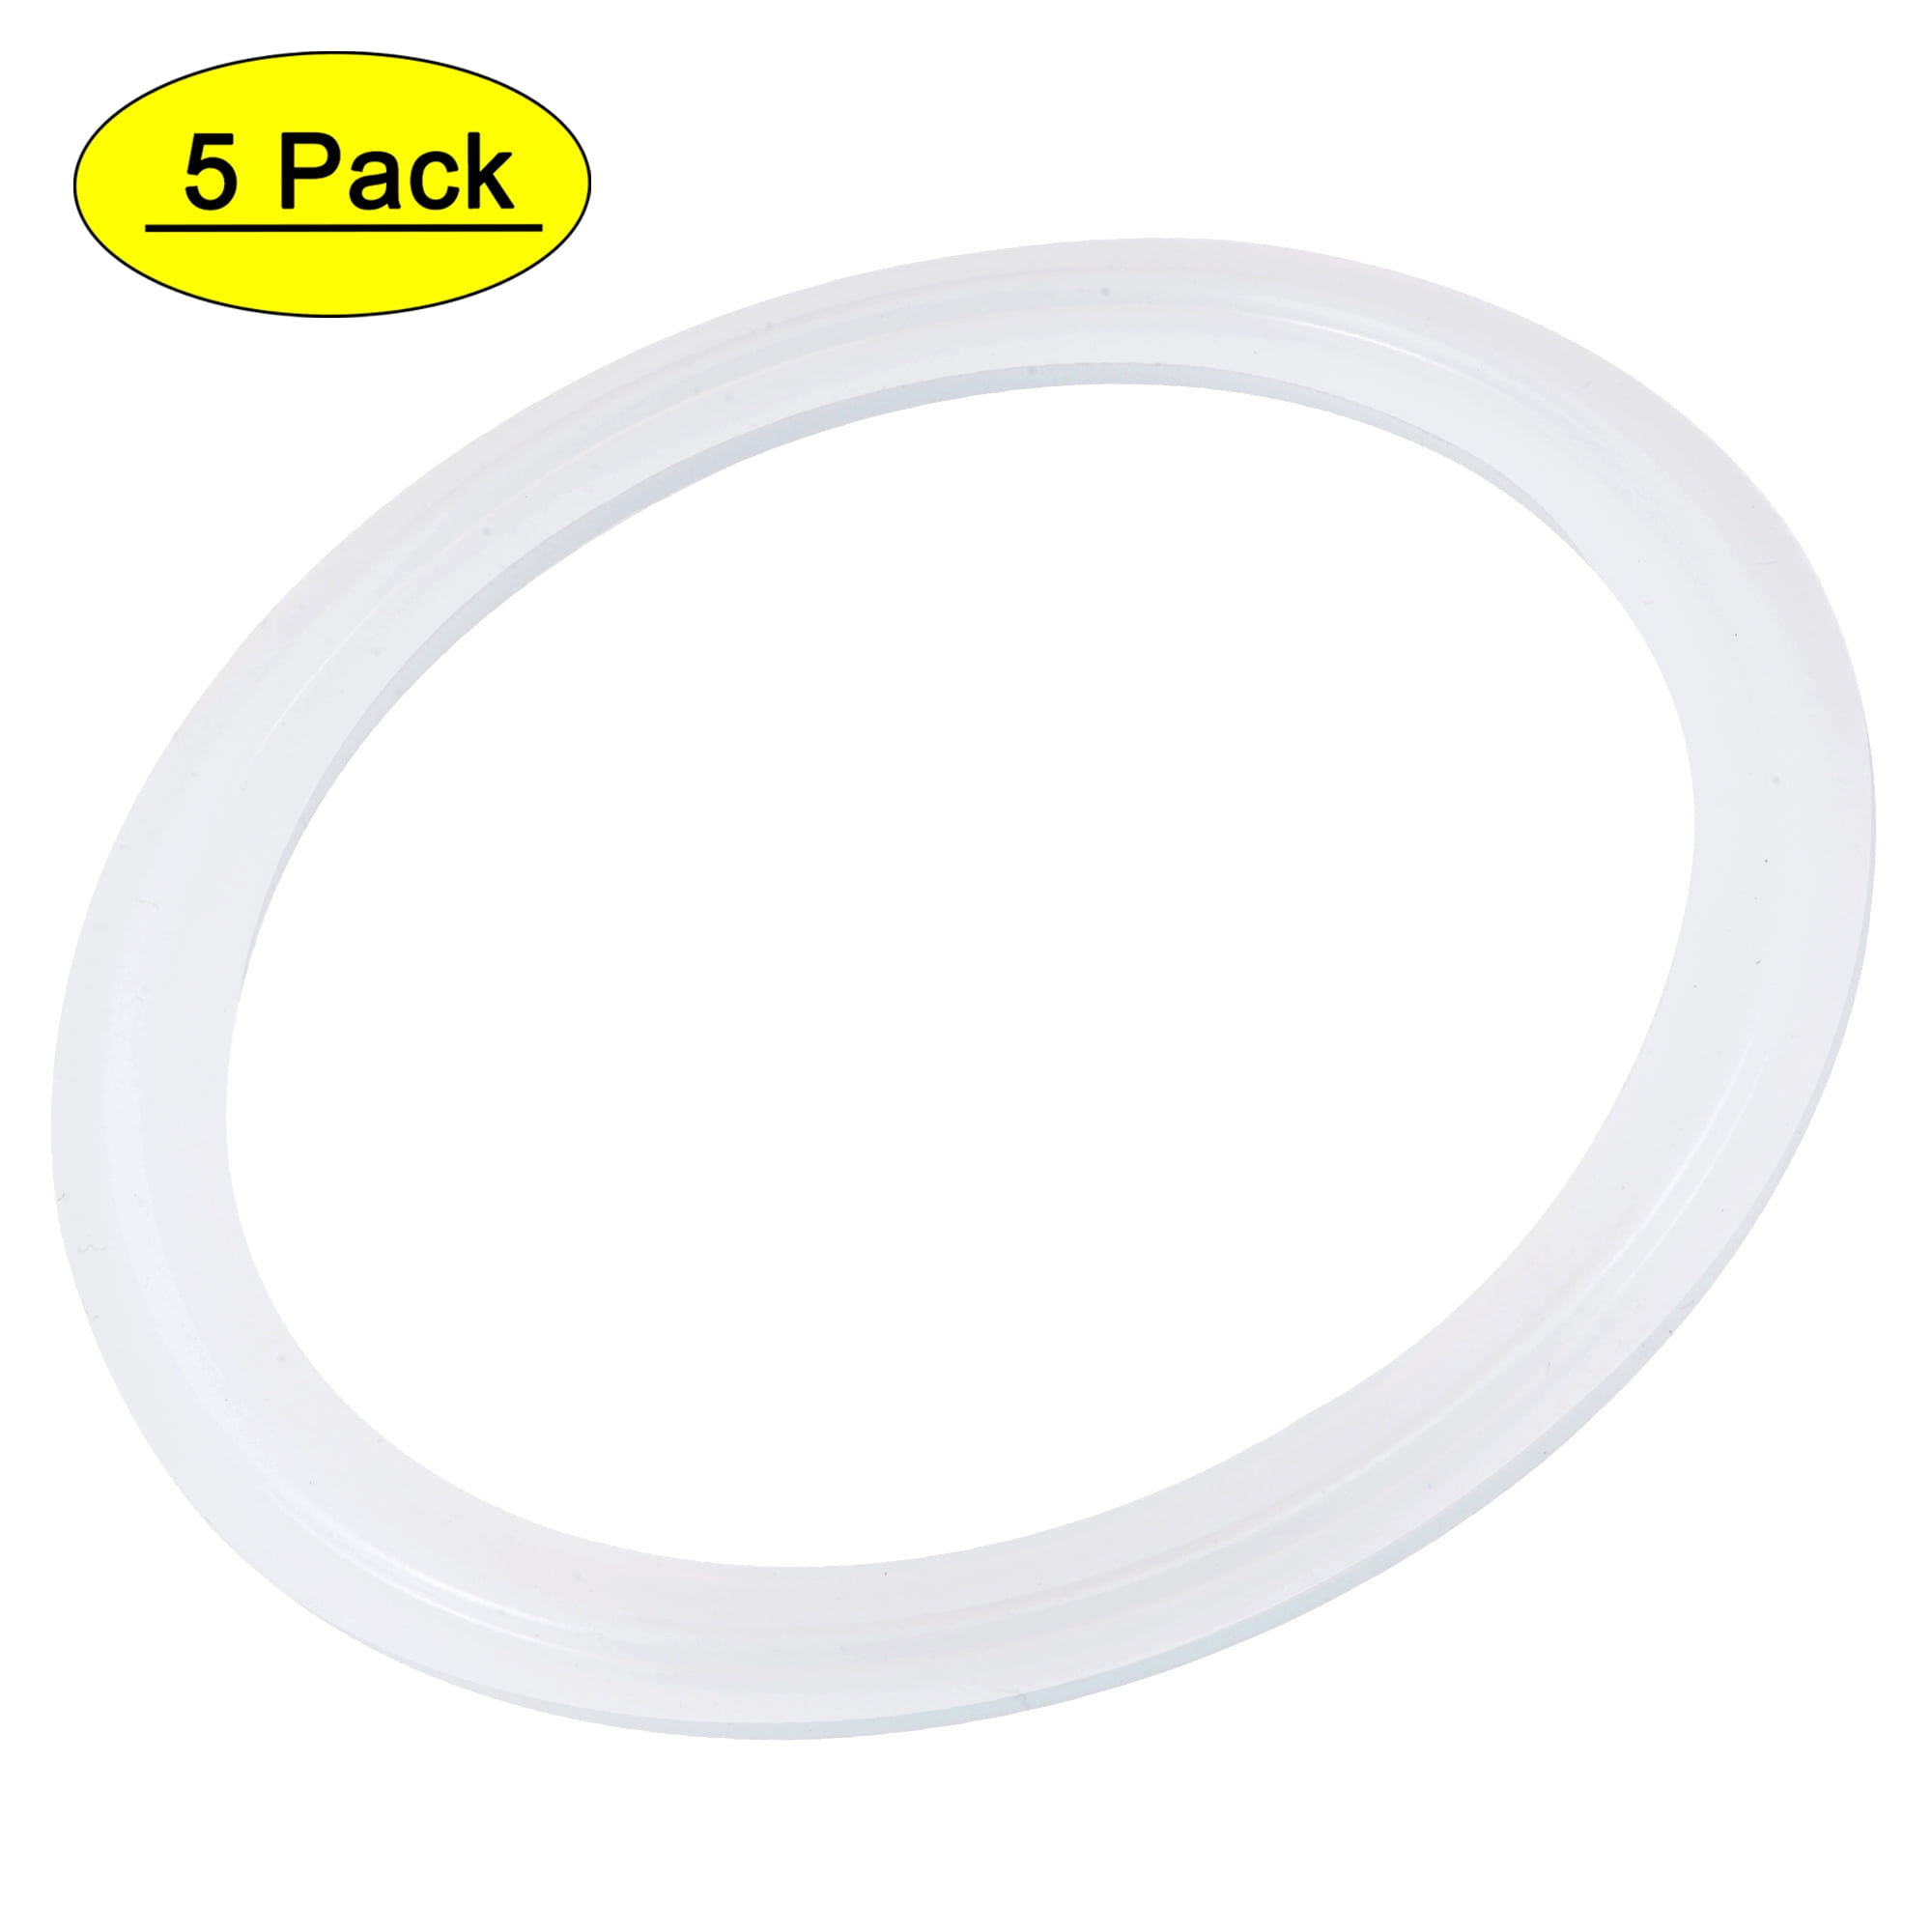  DanziX 8 Pack Replacement Gasket Rubber Seal, Silicone